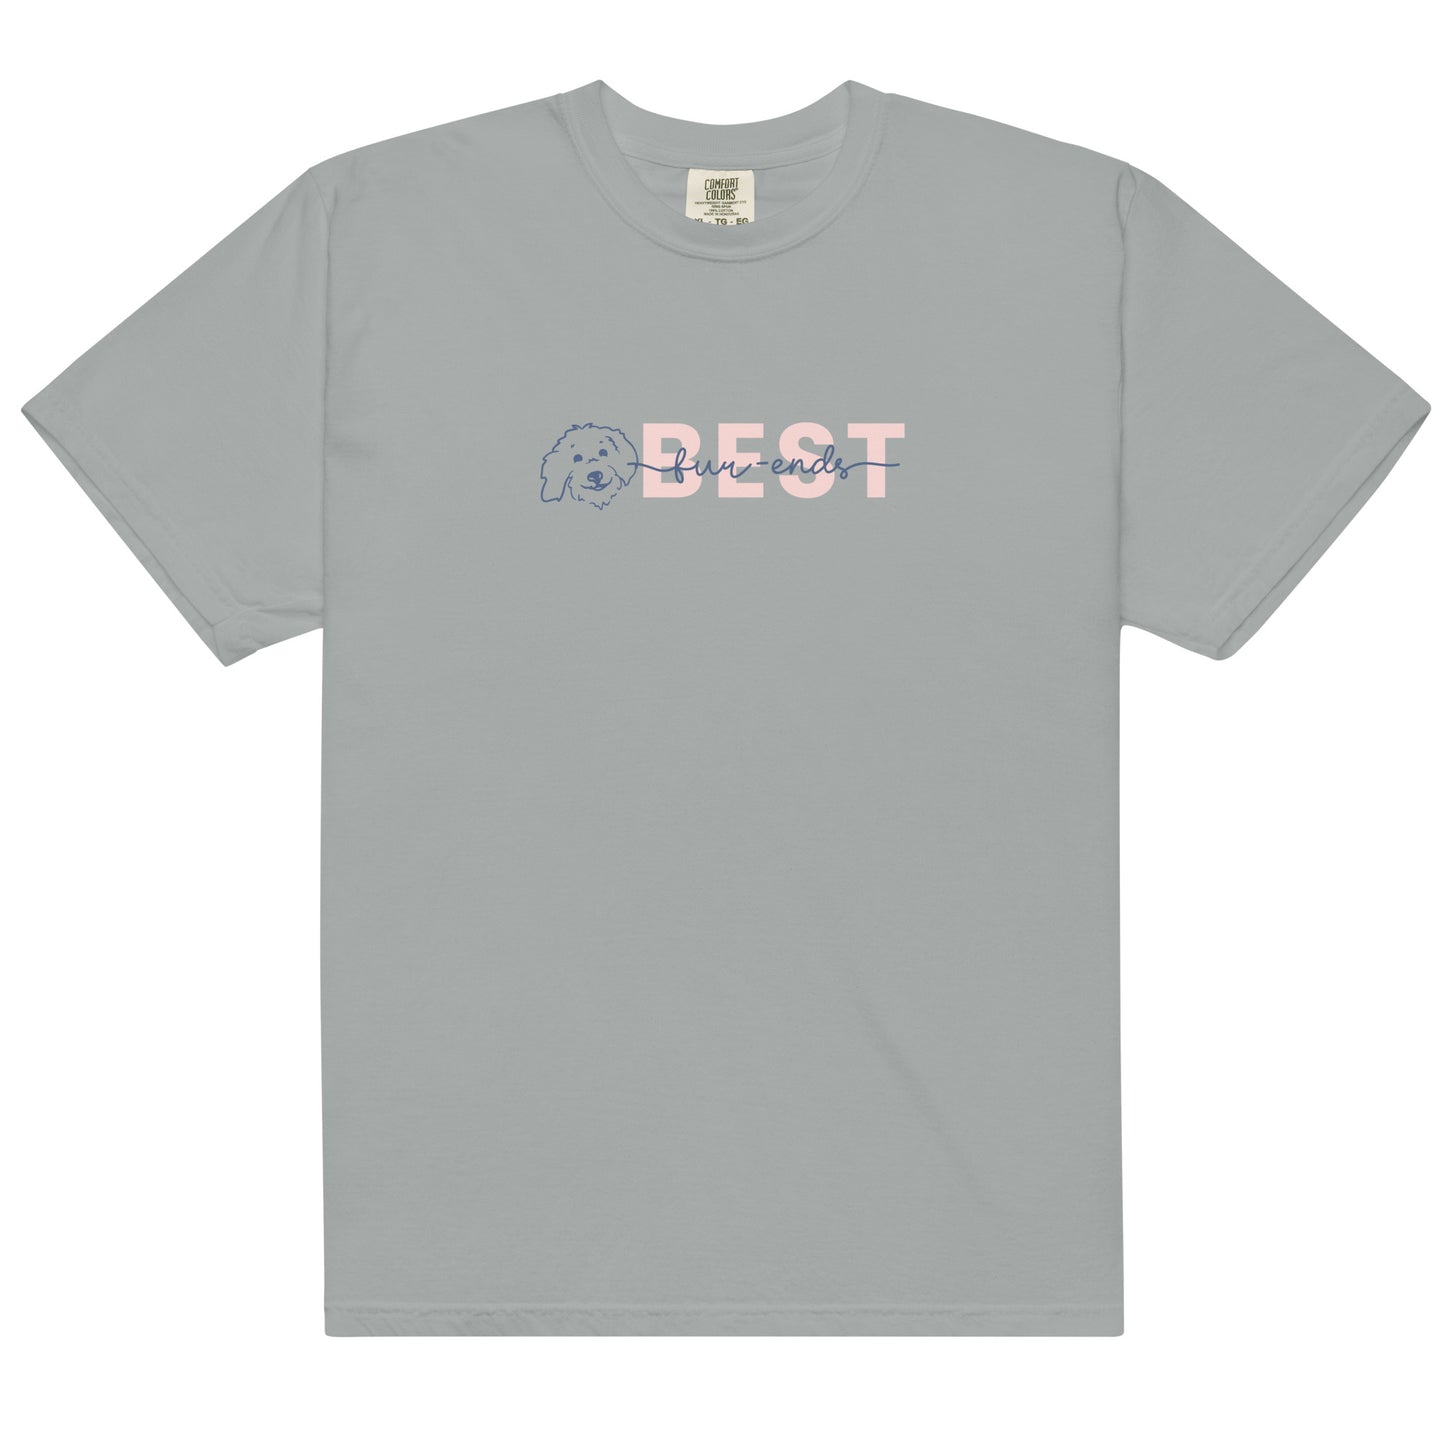 Goldendoodle t-shirt comfort colors with Goldendoodle face and words "Best fur-Ends" in granite color